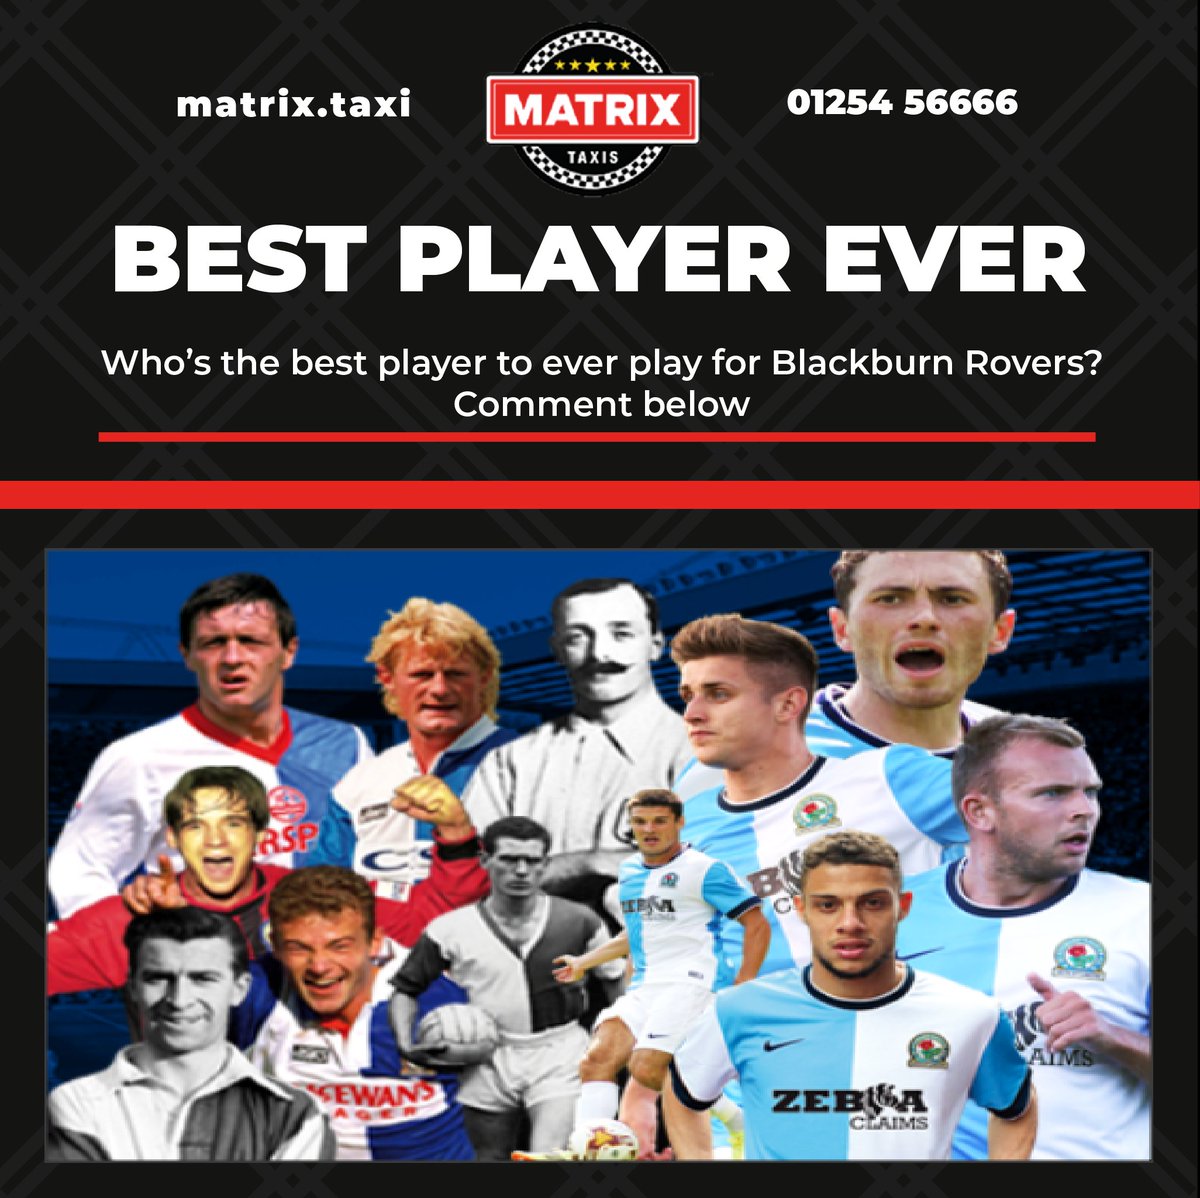 Who’s the best player to ever play for Blackburn Rovers?
Comment what you think and let’s get a conversation going!
-
Need a taxi this weekend, keep Matrix in your mind for an A* service.
Book today!

#blackburn #blackburnrovers #rovers #football #legend #legends